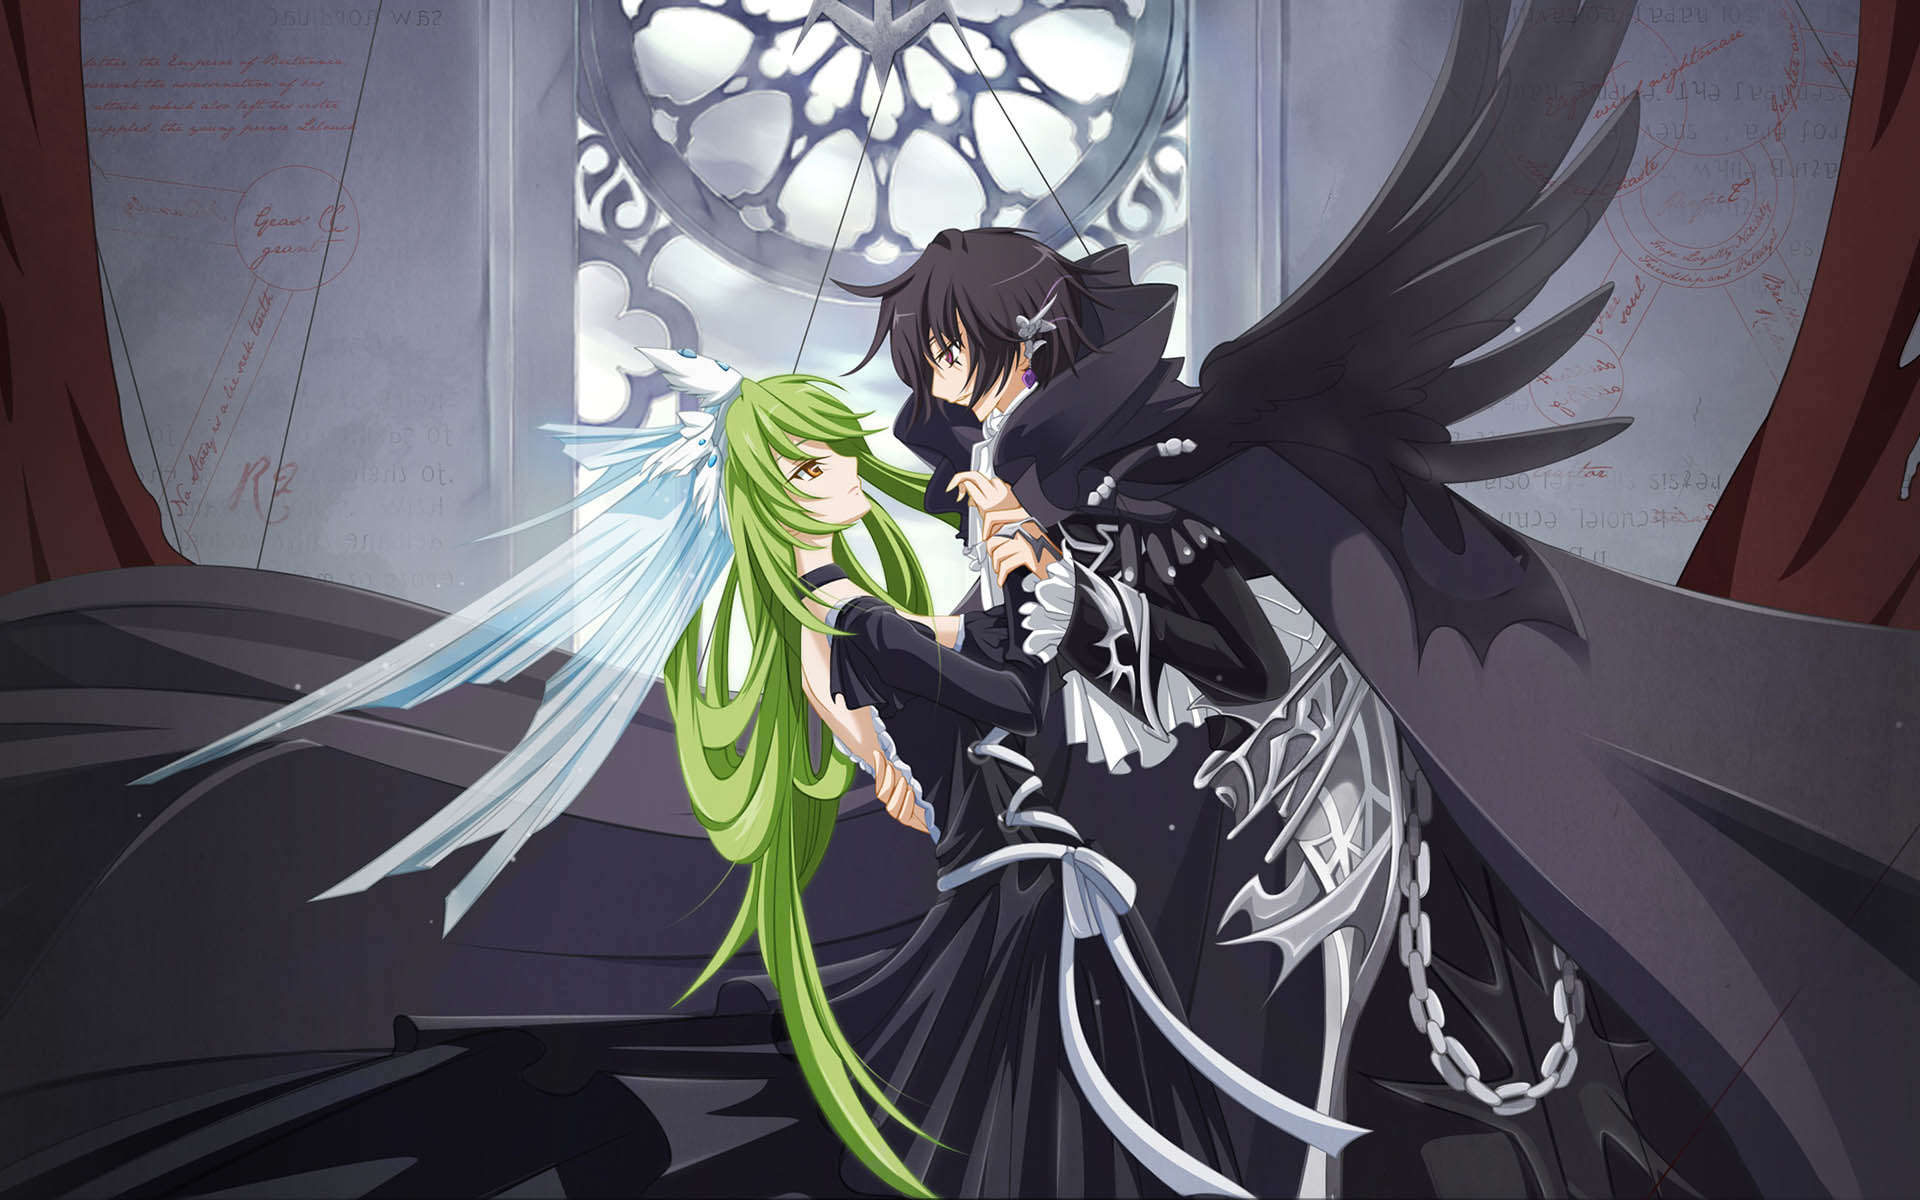 Lelouch and C.C. from Code Geass series.